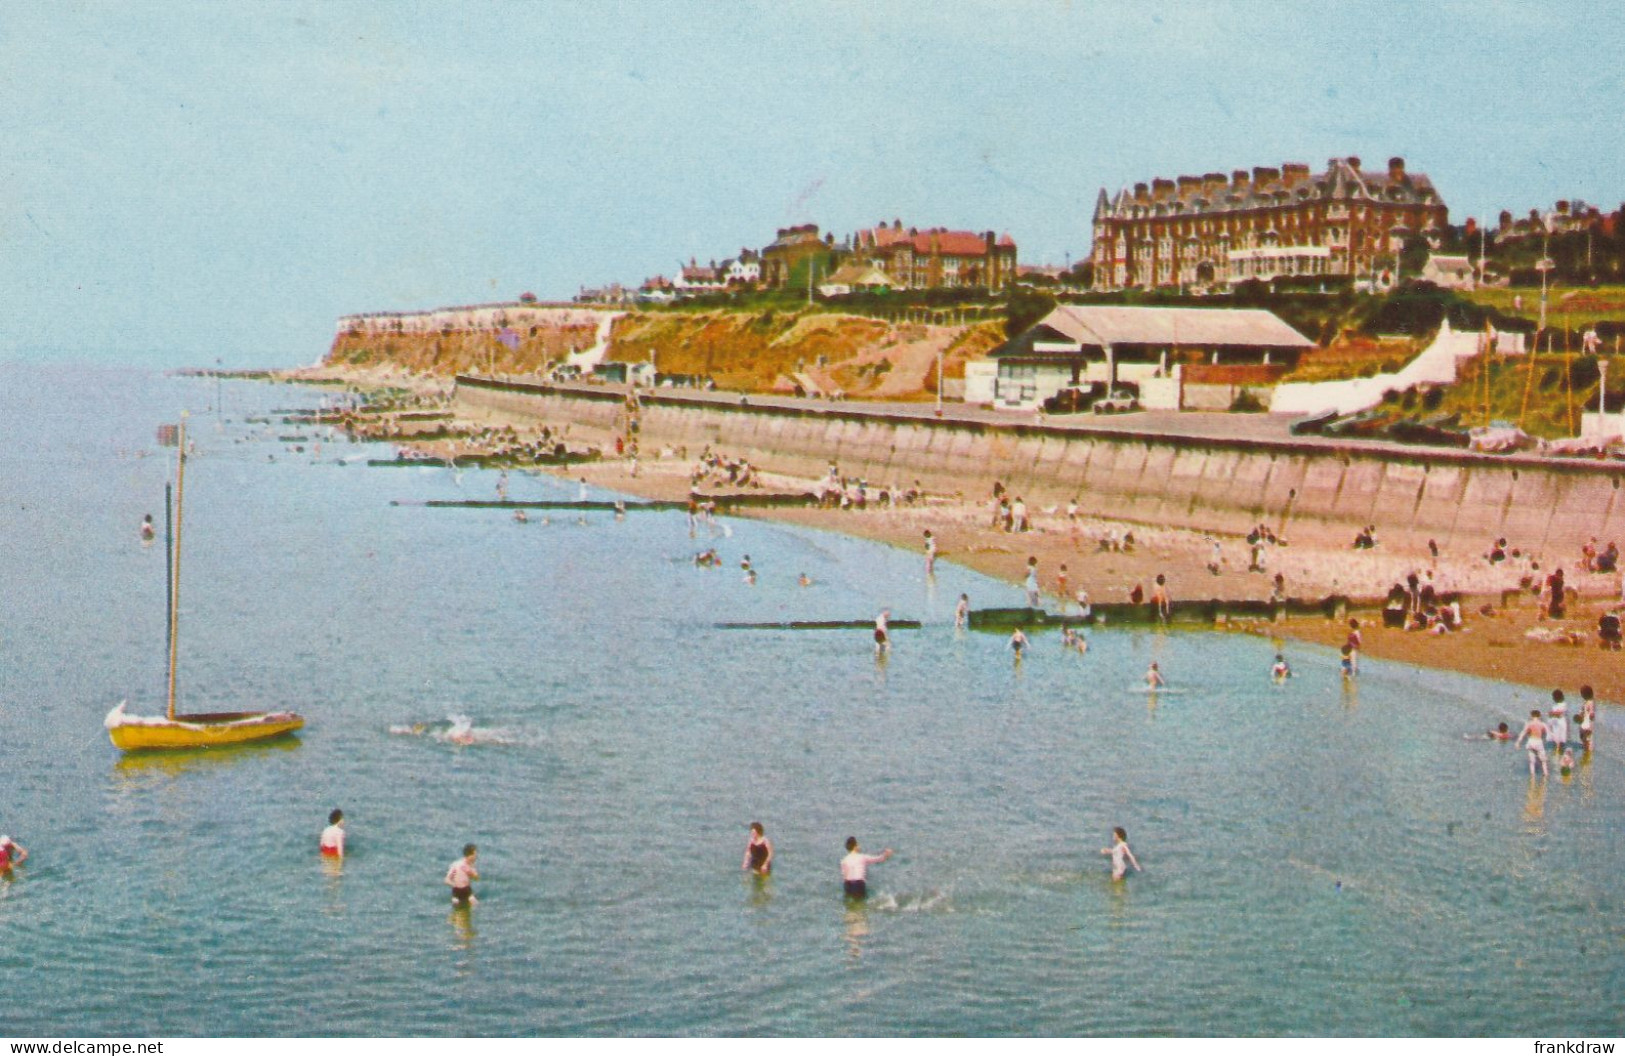 Postcard - North Promenade And Cliffs From Pier, Hunstanton - Dated In Pencil Aug 8th 1966  - Very Good - Zonder Classificatie